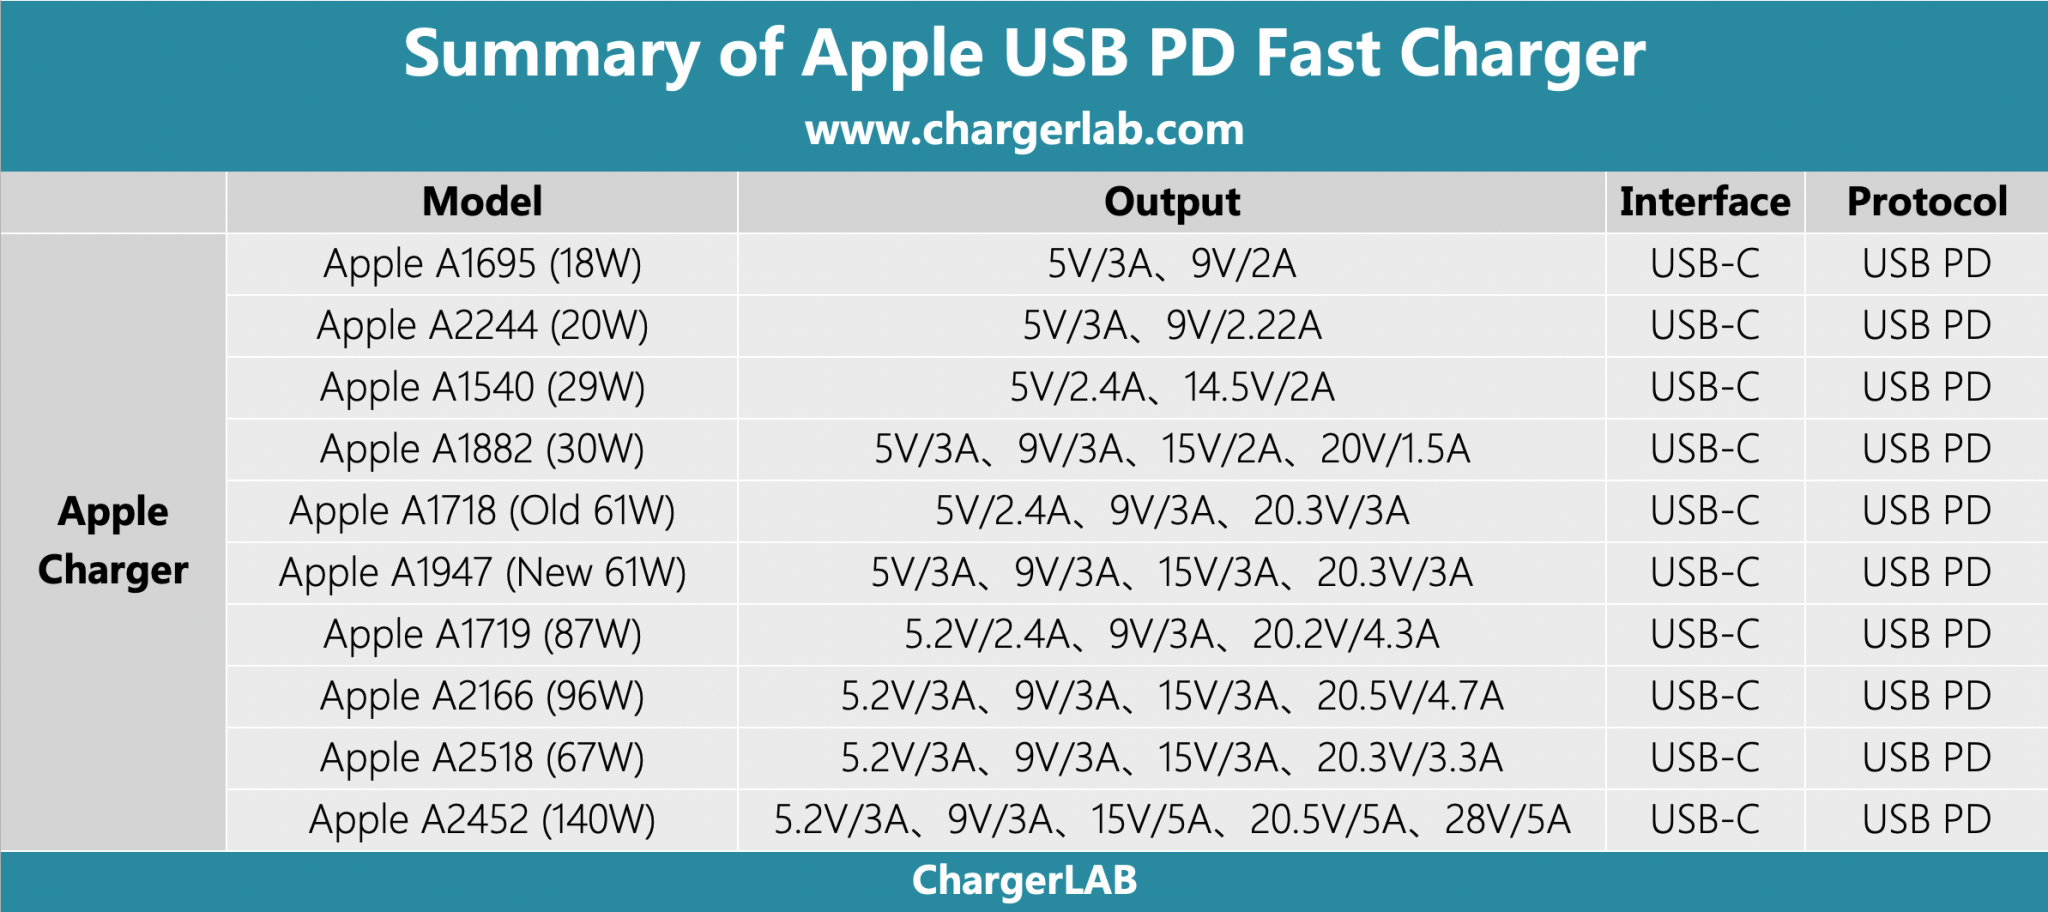 Charge batteries with Apple 140W USB-C Power Adapter from MB Pro | DJI FORUM